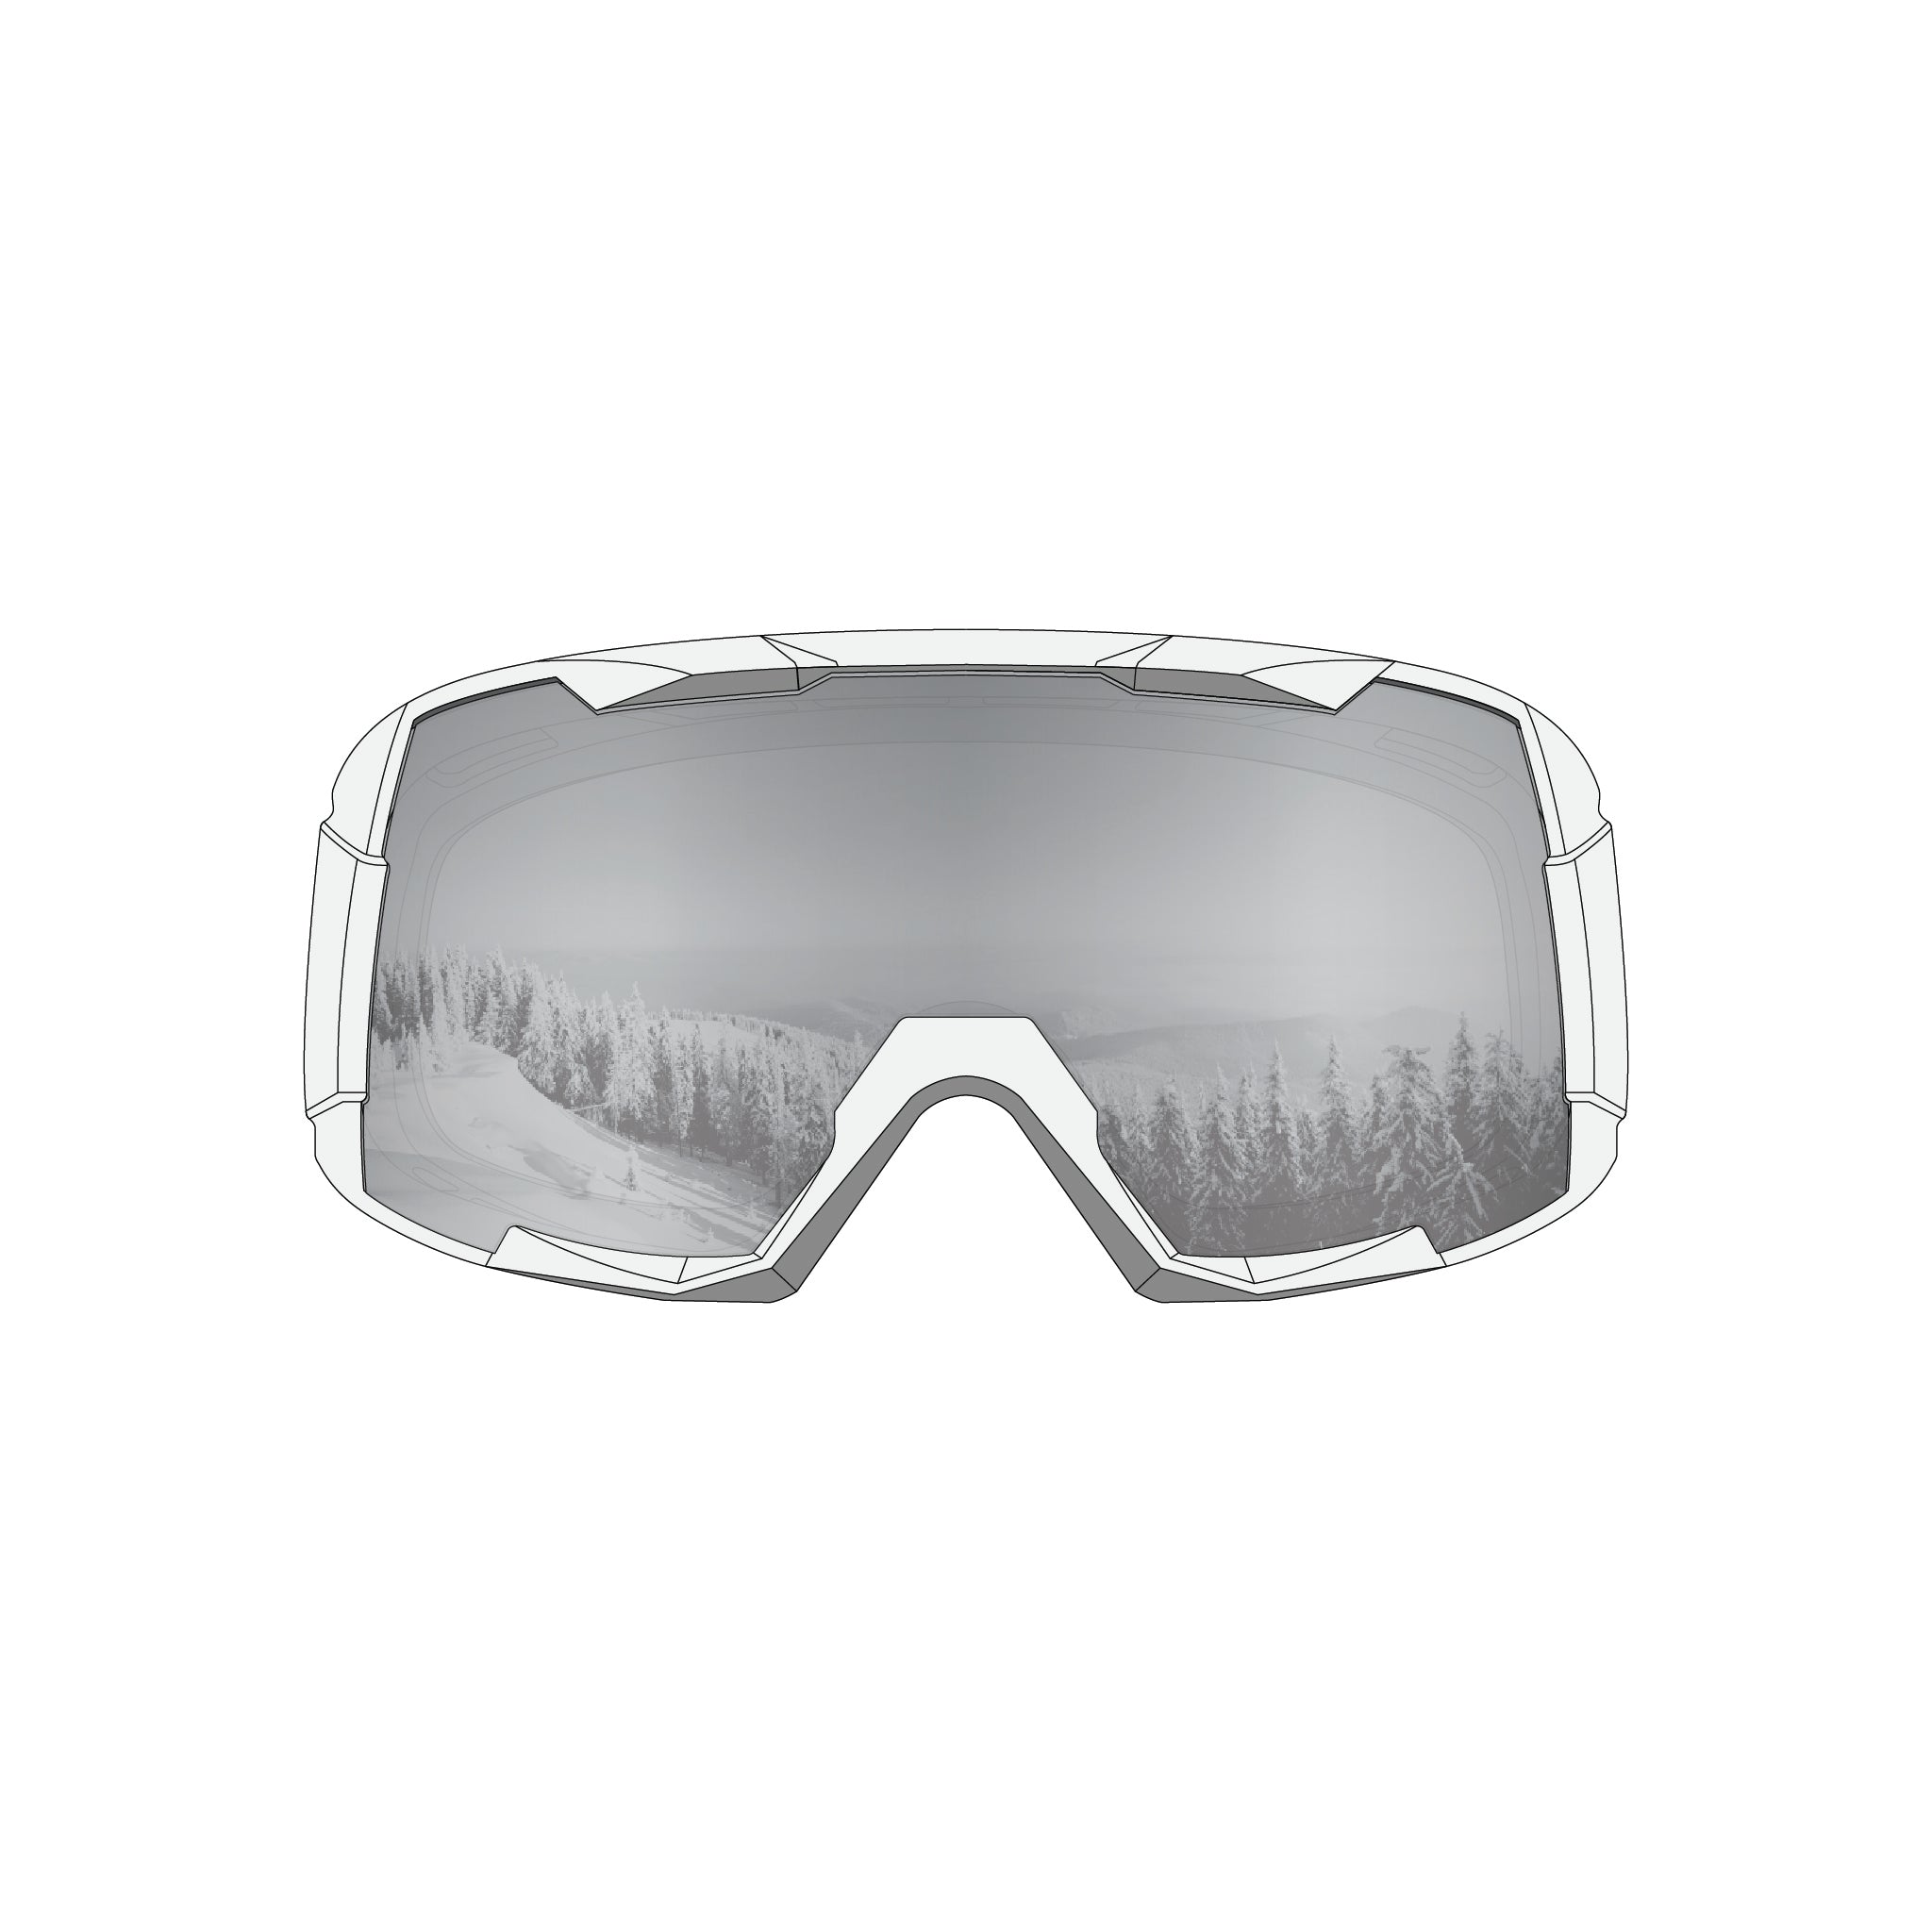 STAGE Stunt Ski Goggle - Black - Interchangeable Lens and Strap